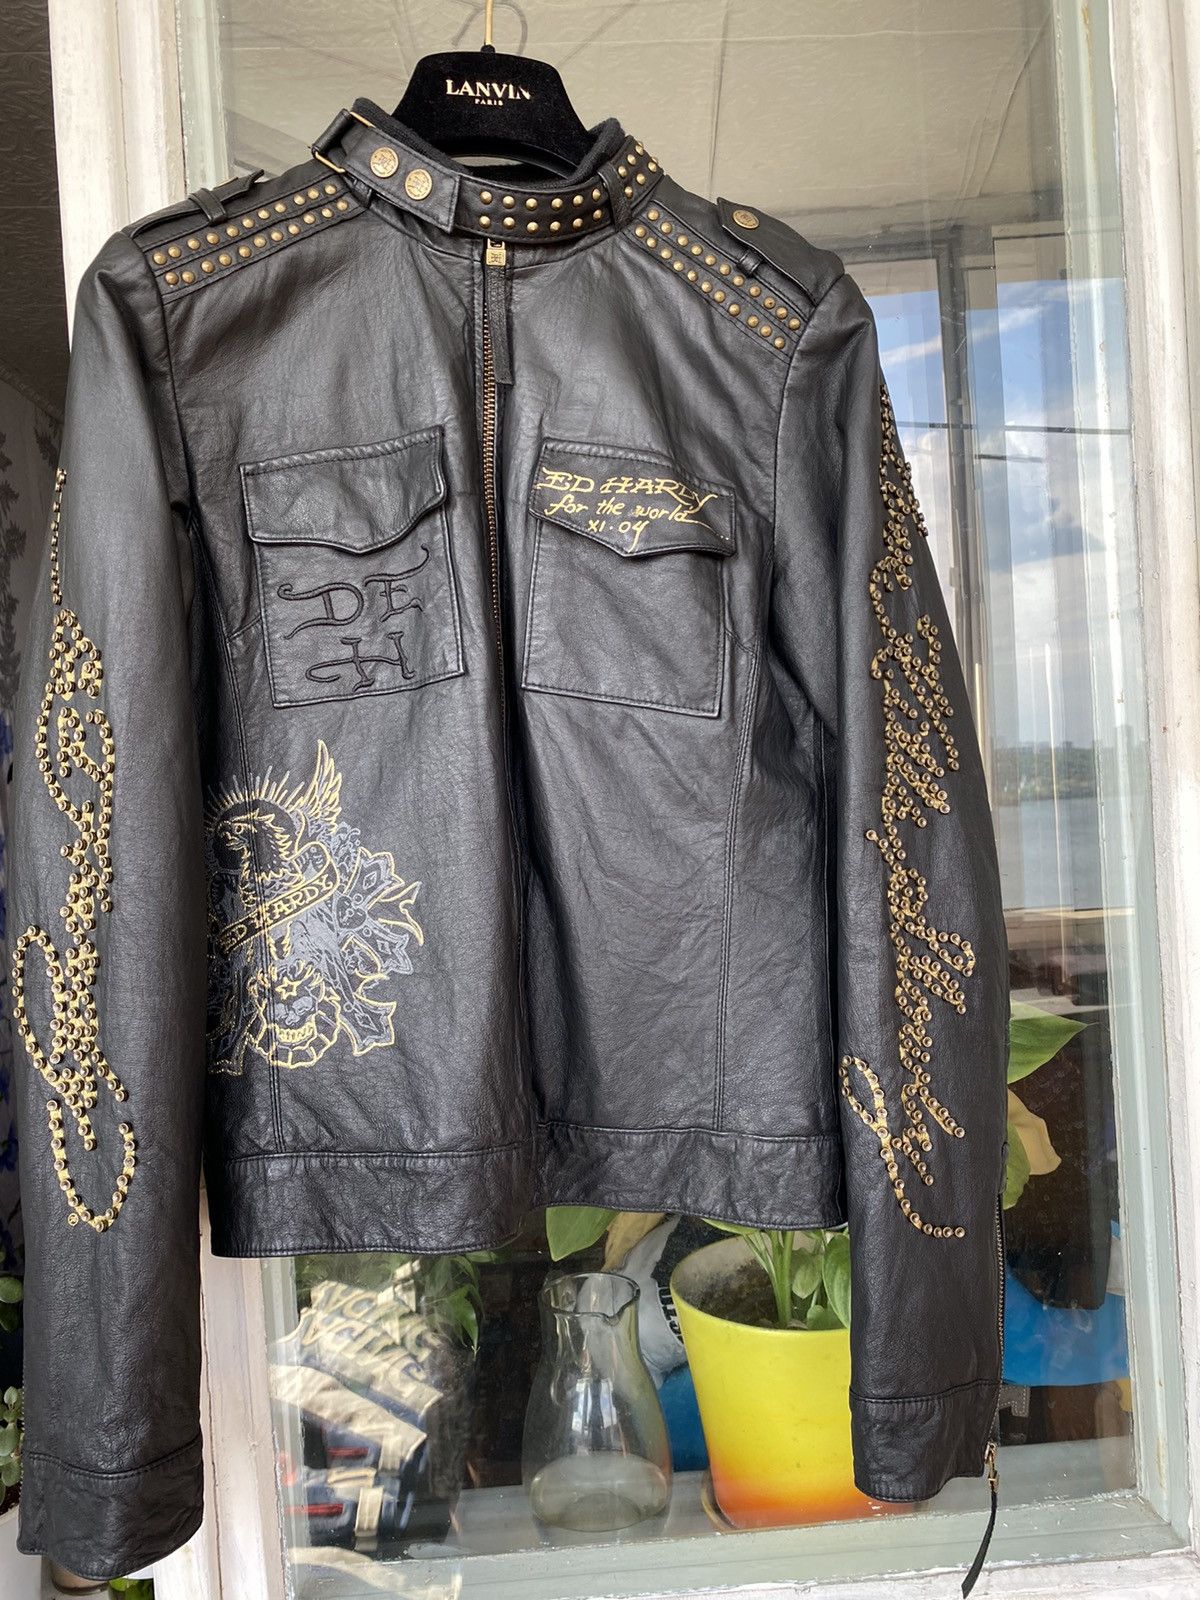 Vintage Vintage Ed hardy Jacket Leather motorcycle bomber Size US S / EU 44-46 / 1 - 2 Preview